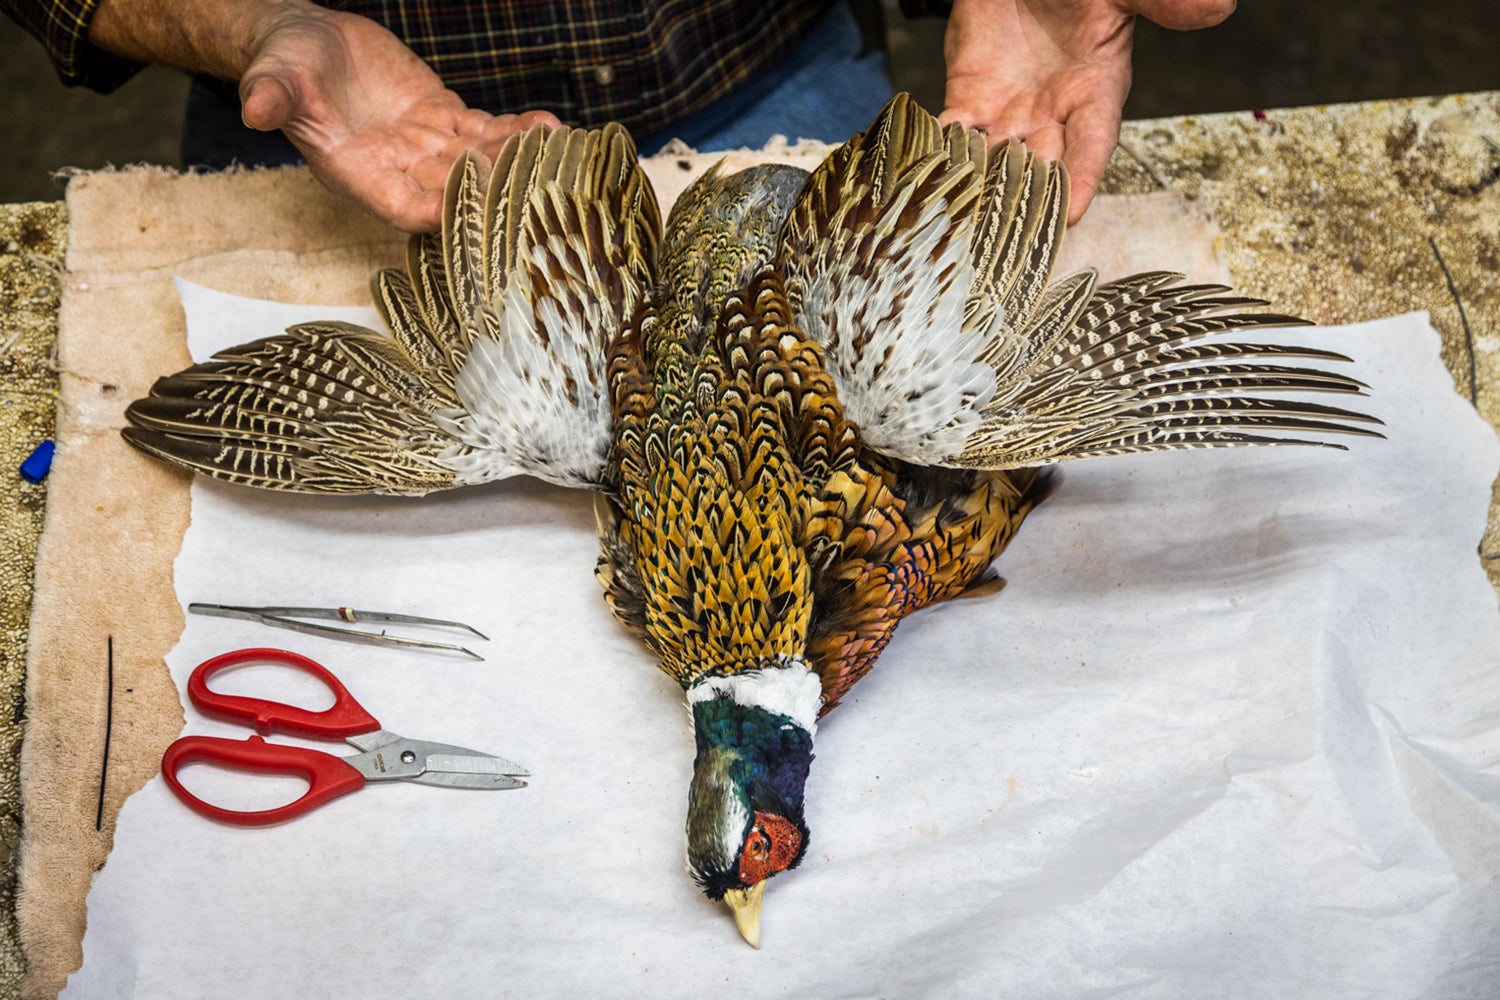 Pheasant taxidermy on a table.